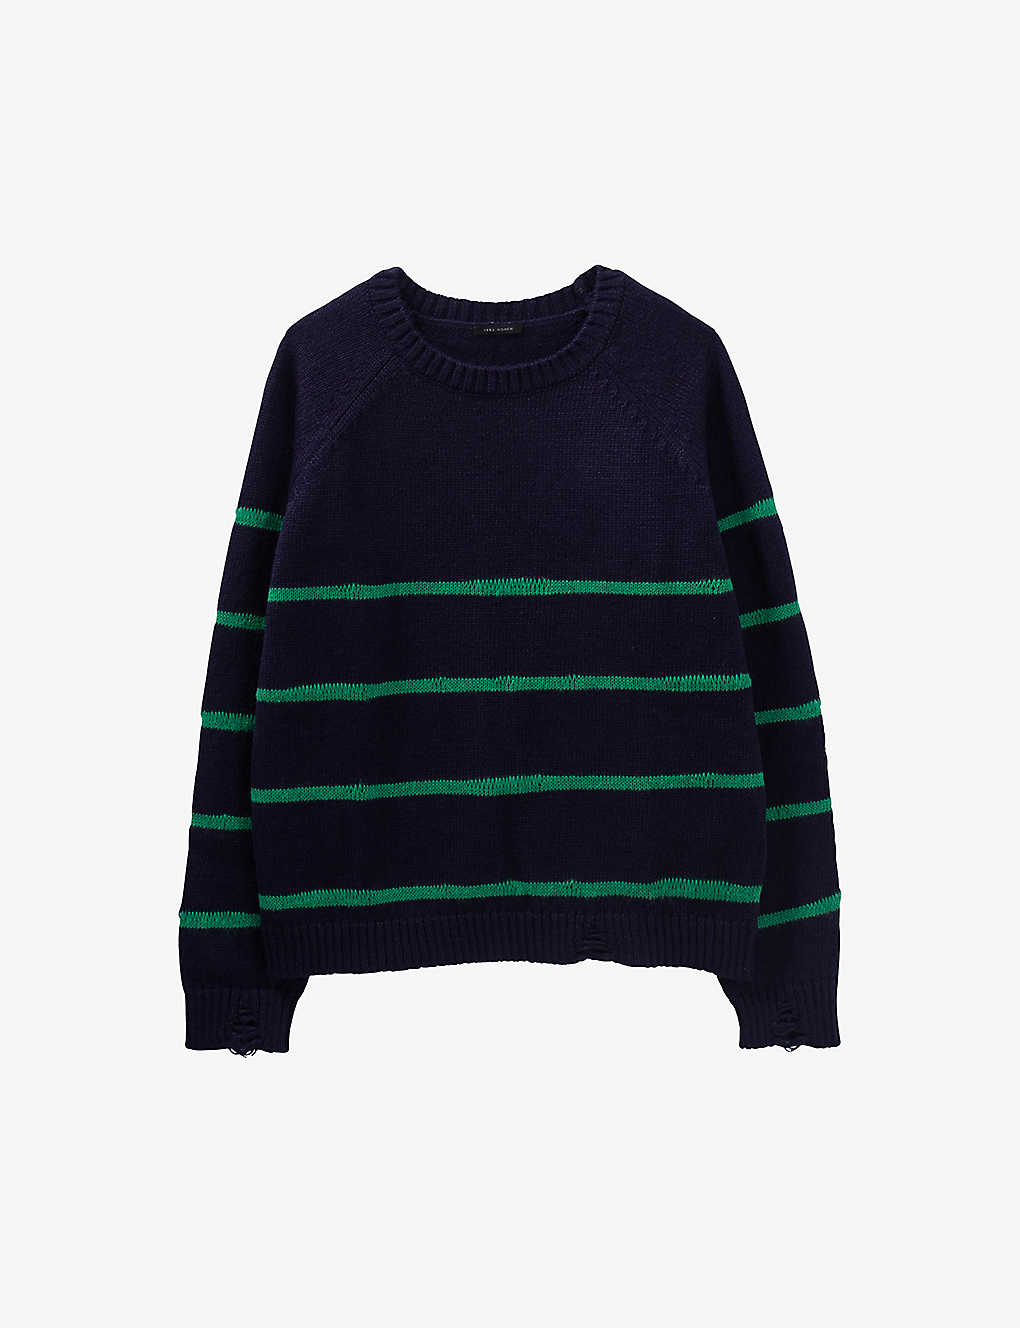 Ikks Womens Navy Blue Striped Relaxed-fit Knitted Jumper